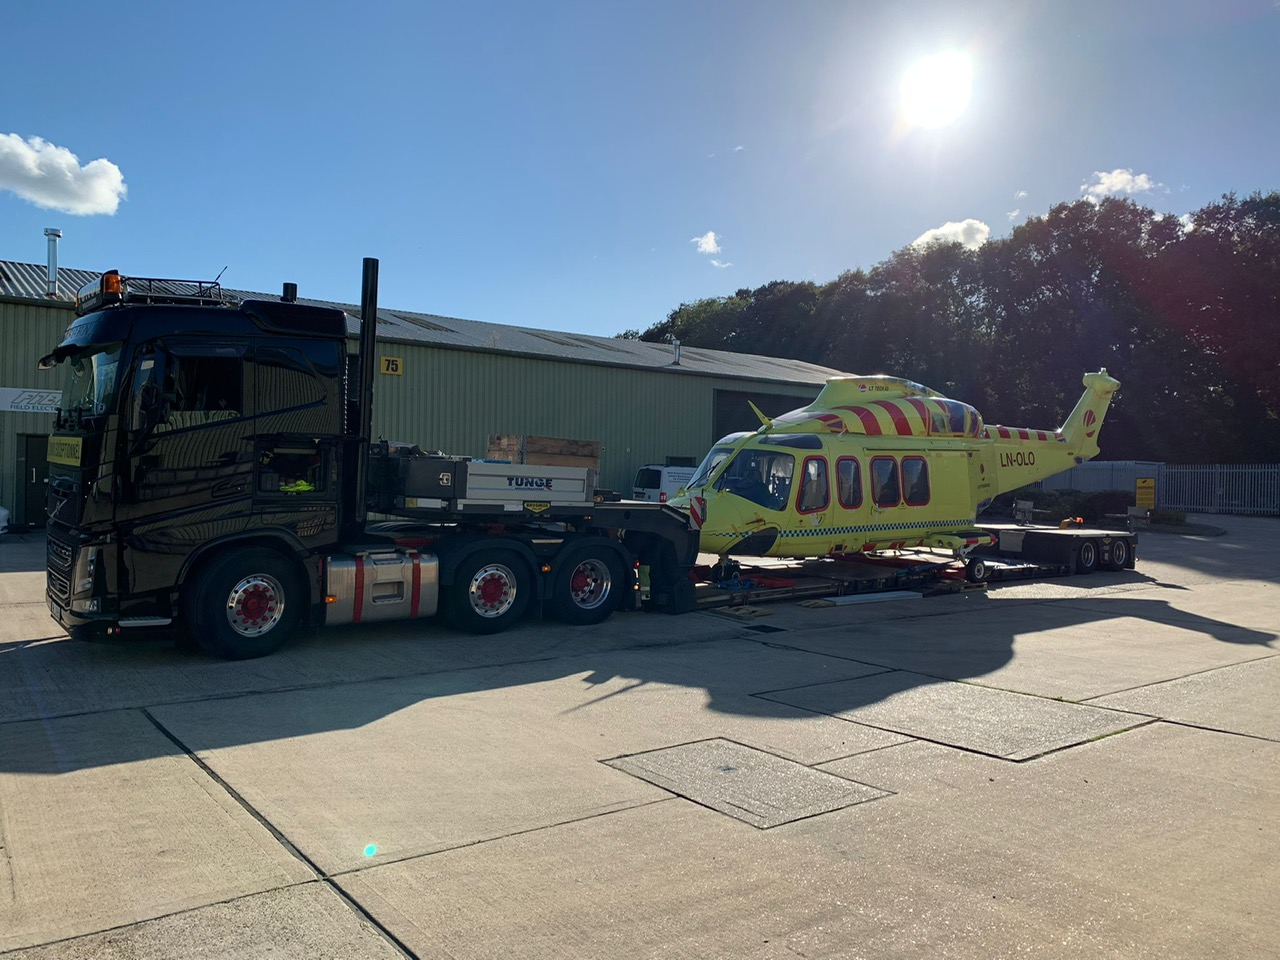 Complete AW139 Acquired for Part-Out